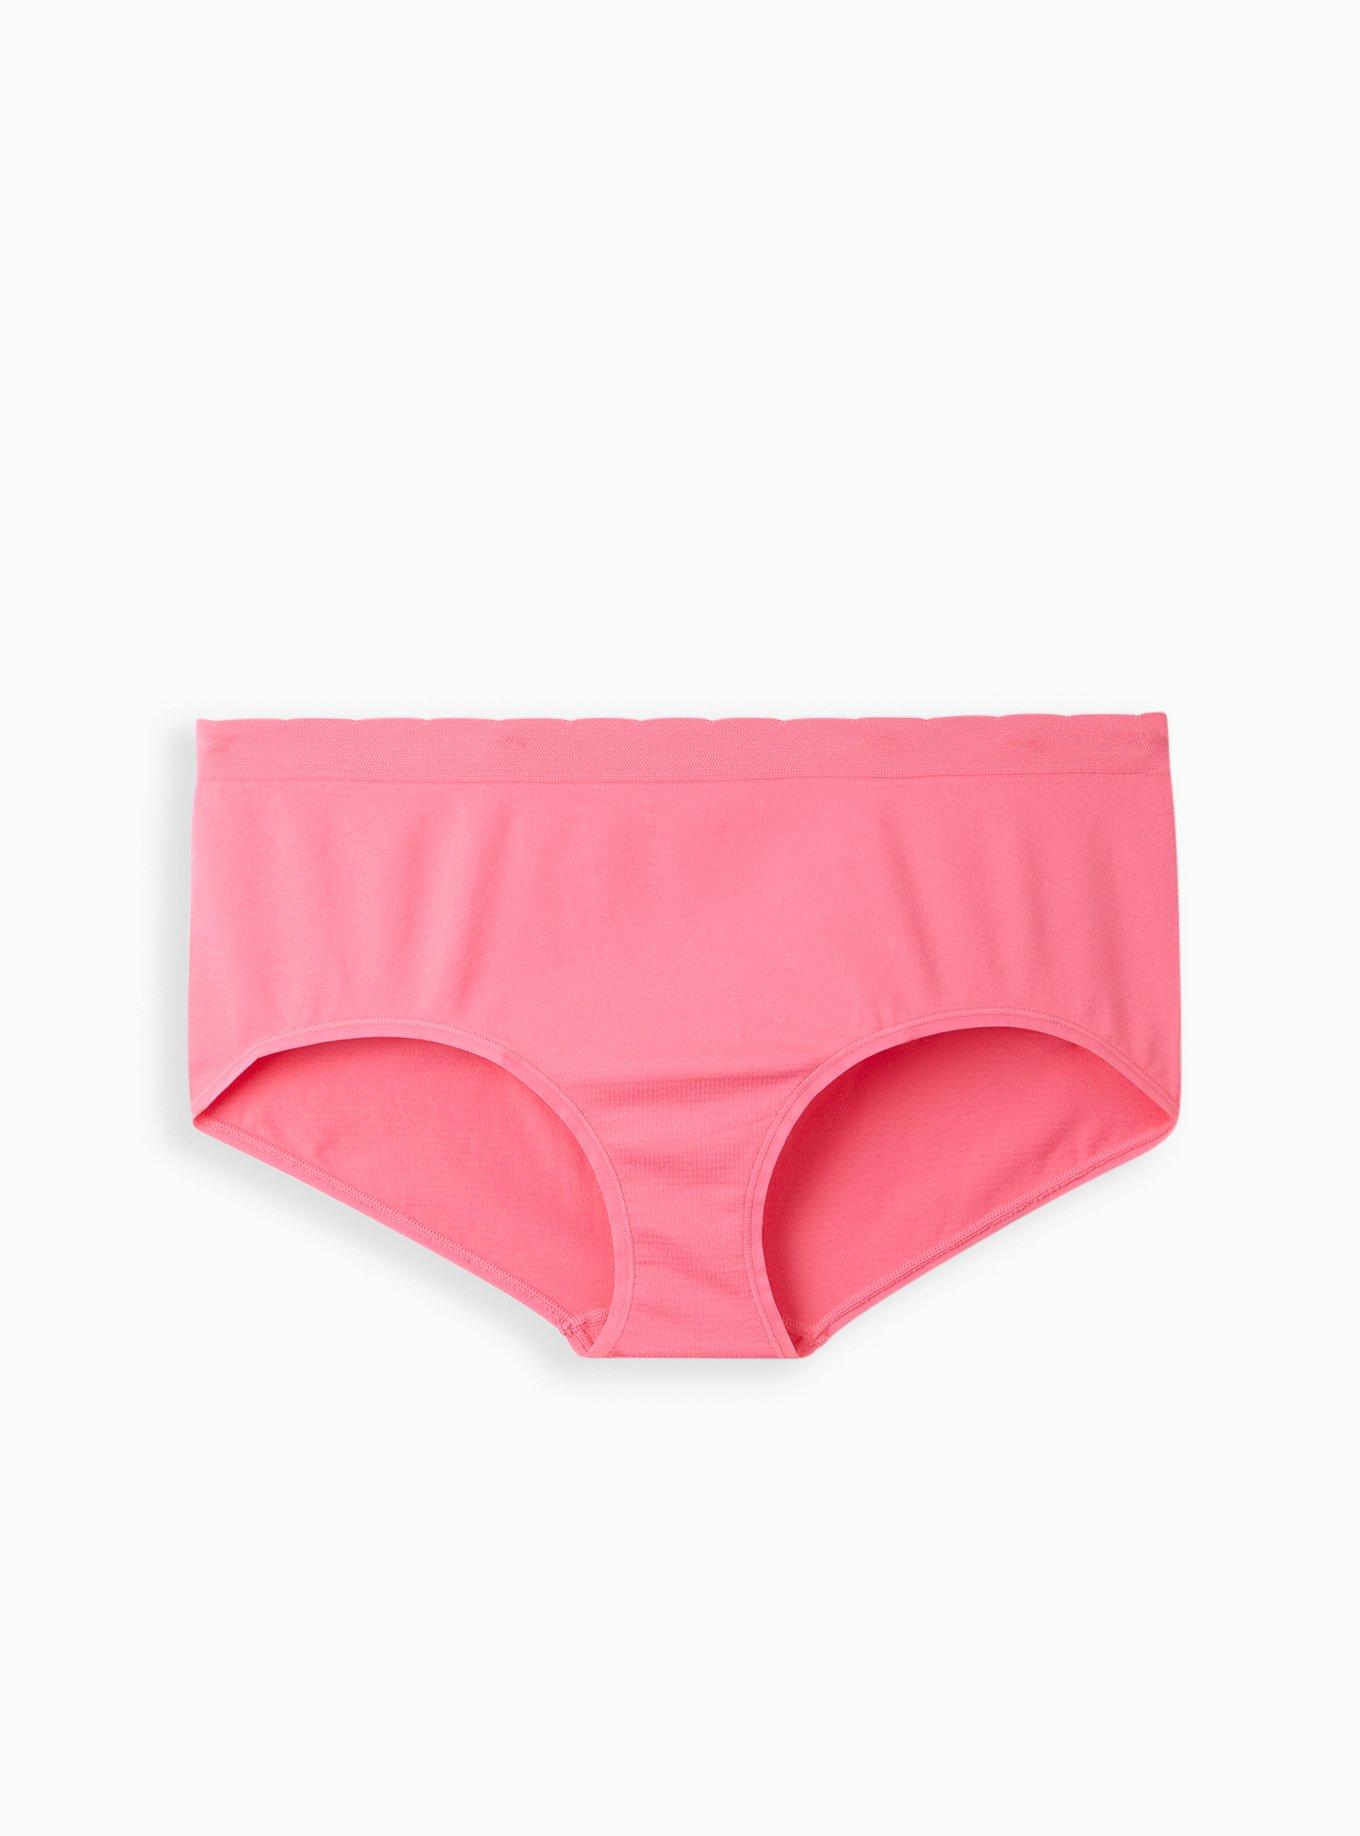 I Tried The Cheeky Underwear Brand We've All Been Hearing About